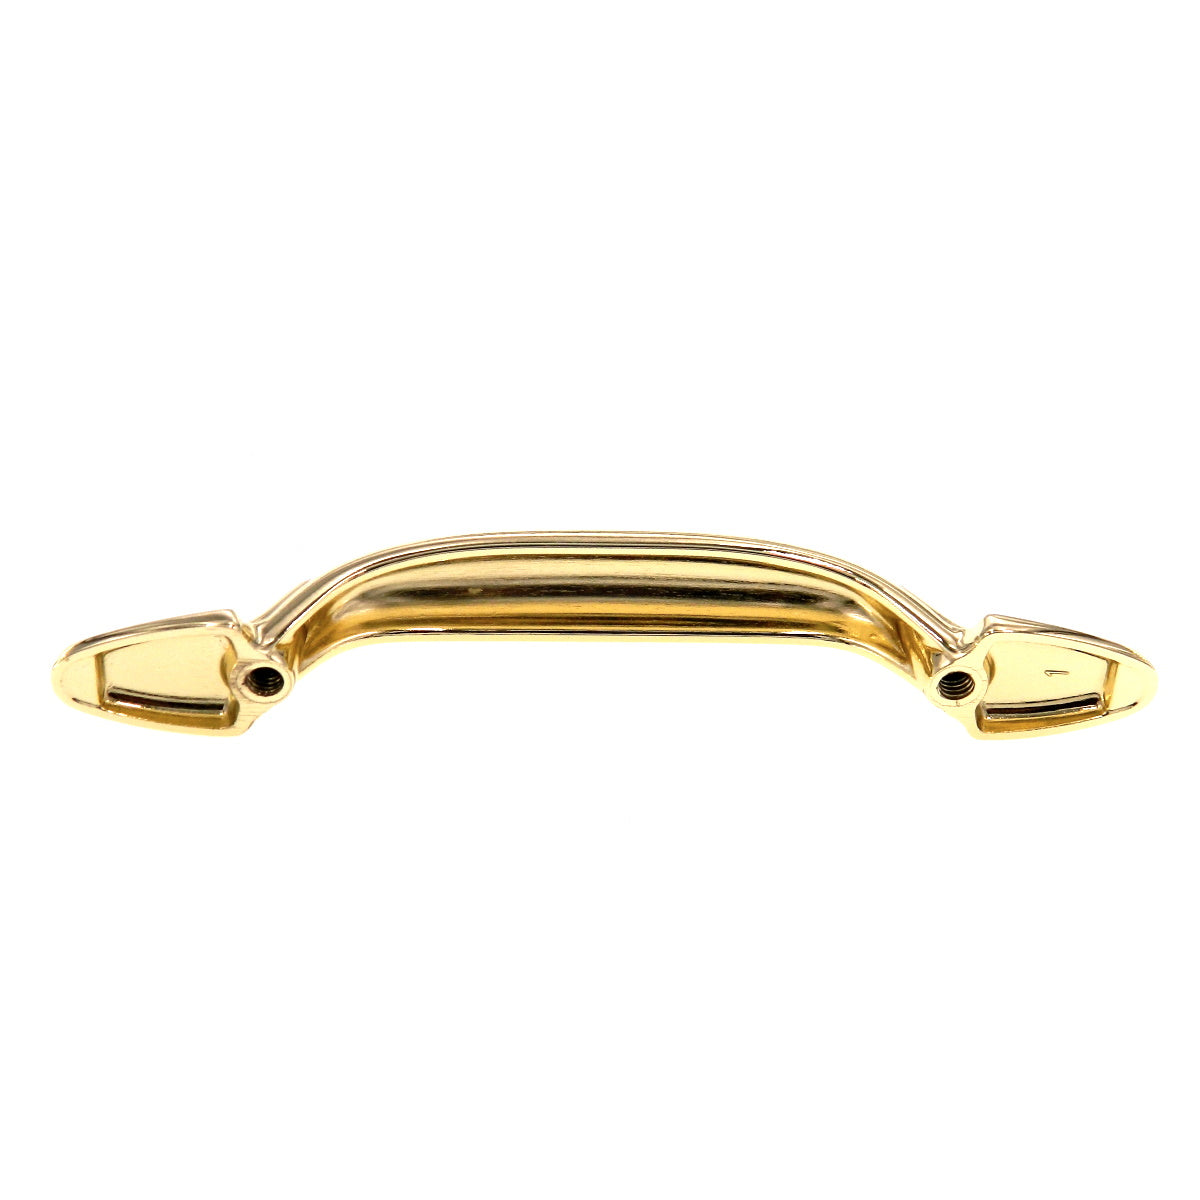 Amerock Allison Polished Brass 3" Ctr. Cabinet Arch Pull Handle BP53008-3